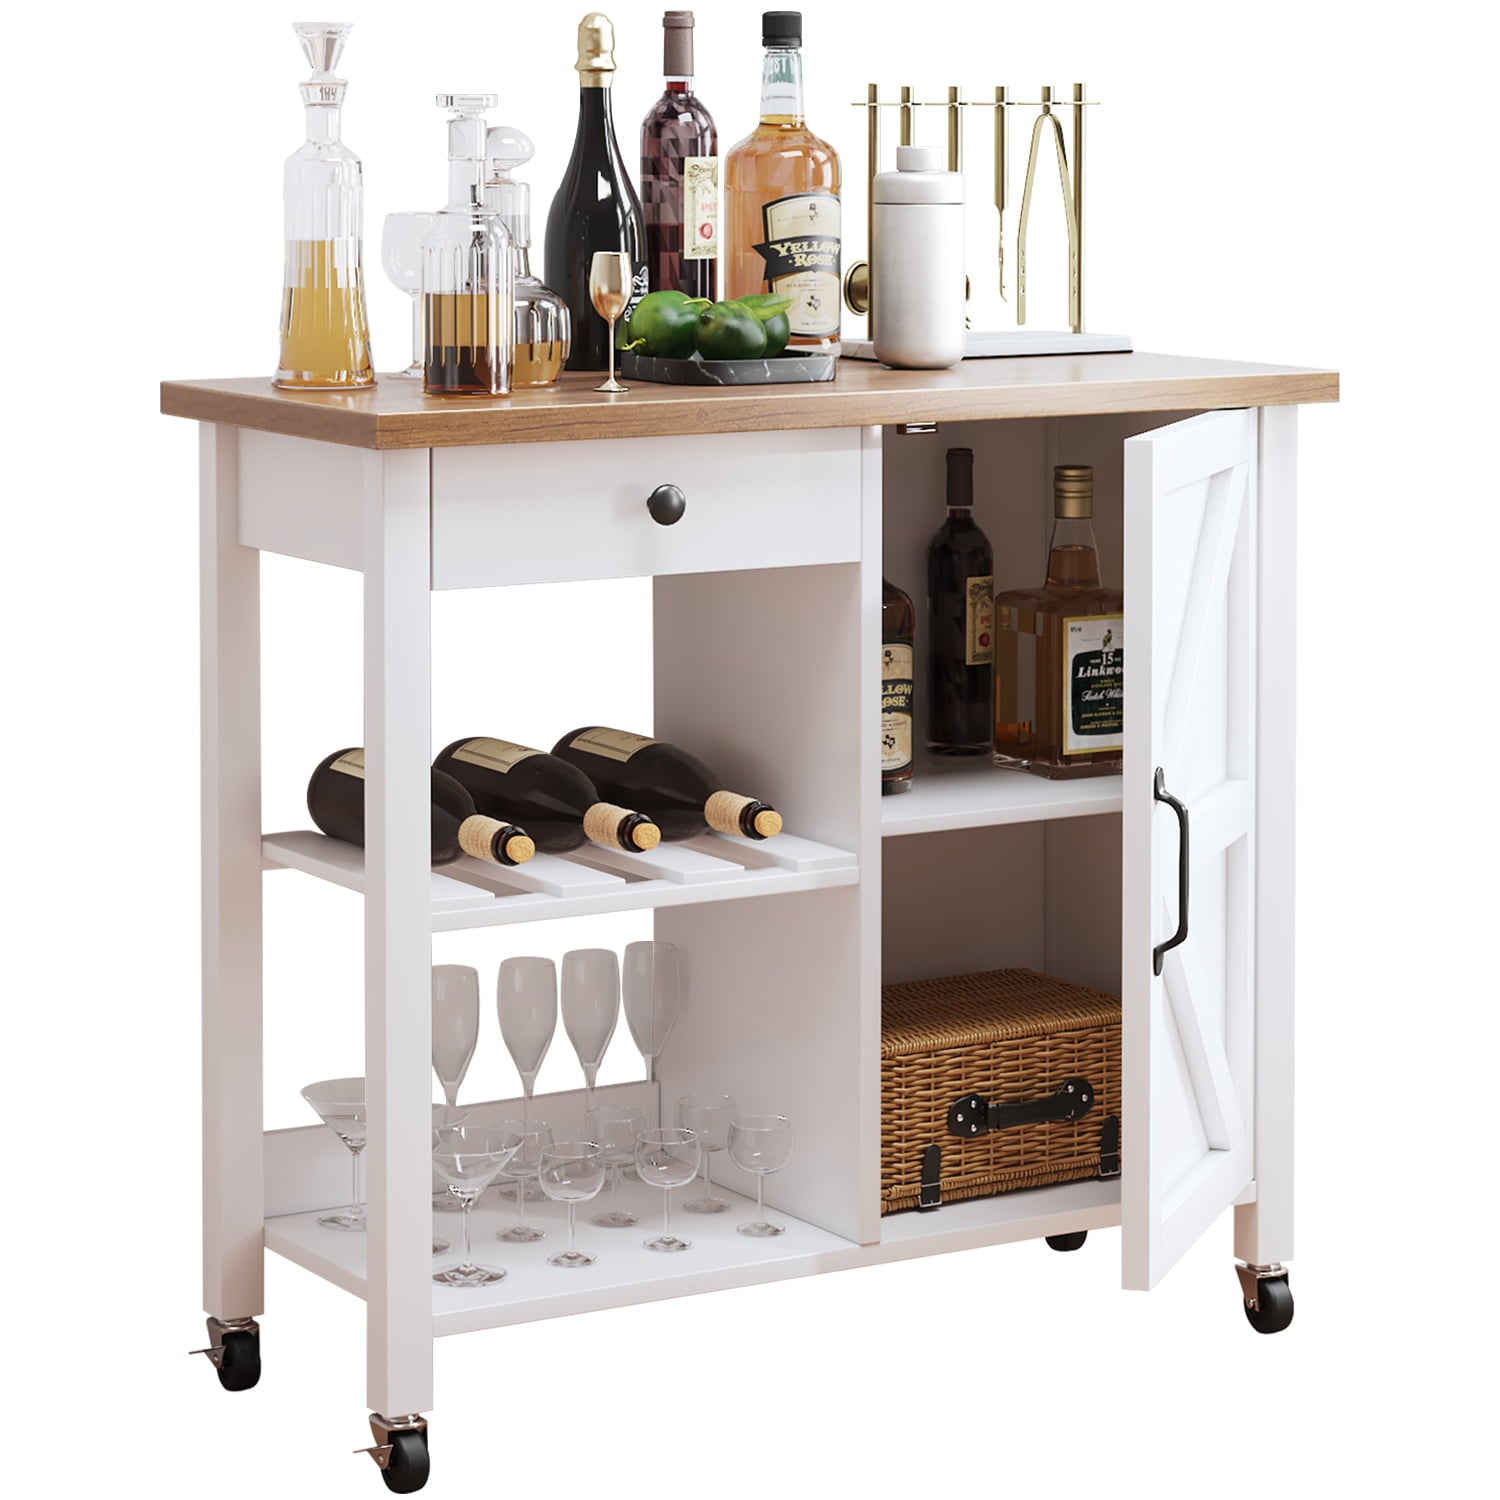 Catrimown Farmhouse Kitchen Island Cart with Storage， Microwave Cart， Microwave Stand， Coffee Bar Stand， White